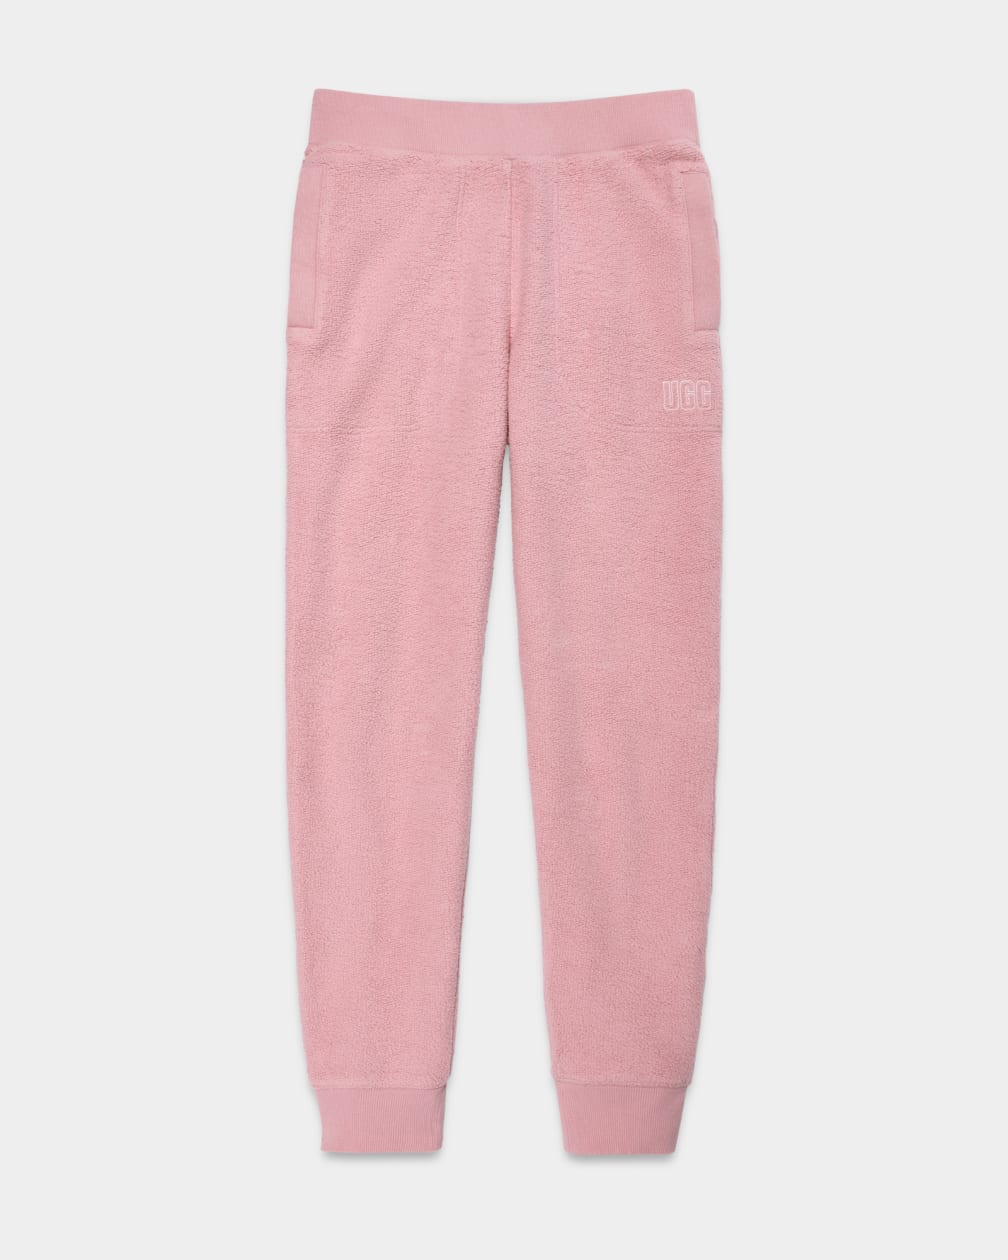 Front view of womens fleece joggers